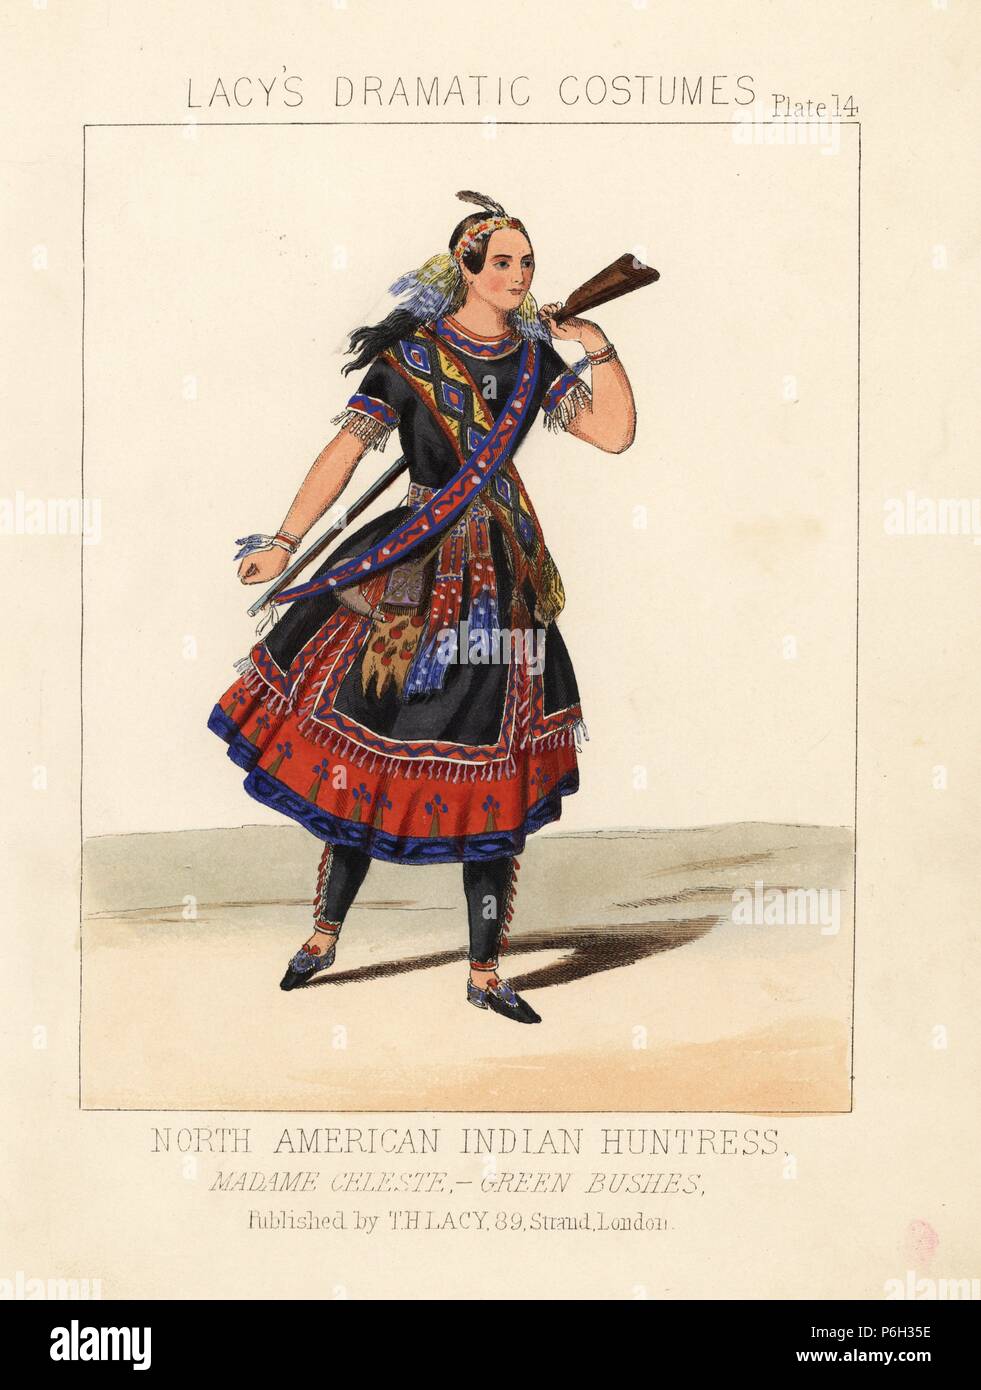 French actress and dancer Celine Celeste as the Native American huntress Miami in John Baldwin Buckstone 'The Green Bushes,' 1845. Handcoloured lithograph from Thomas Hailes Lacy's 'Female Costumes Historical, National and Dramatic in 200 Plates,' London, 1865. Lacy (1809-1873) was a British actor, playwright, theatrical manager and publisher. Stock Photo